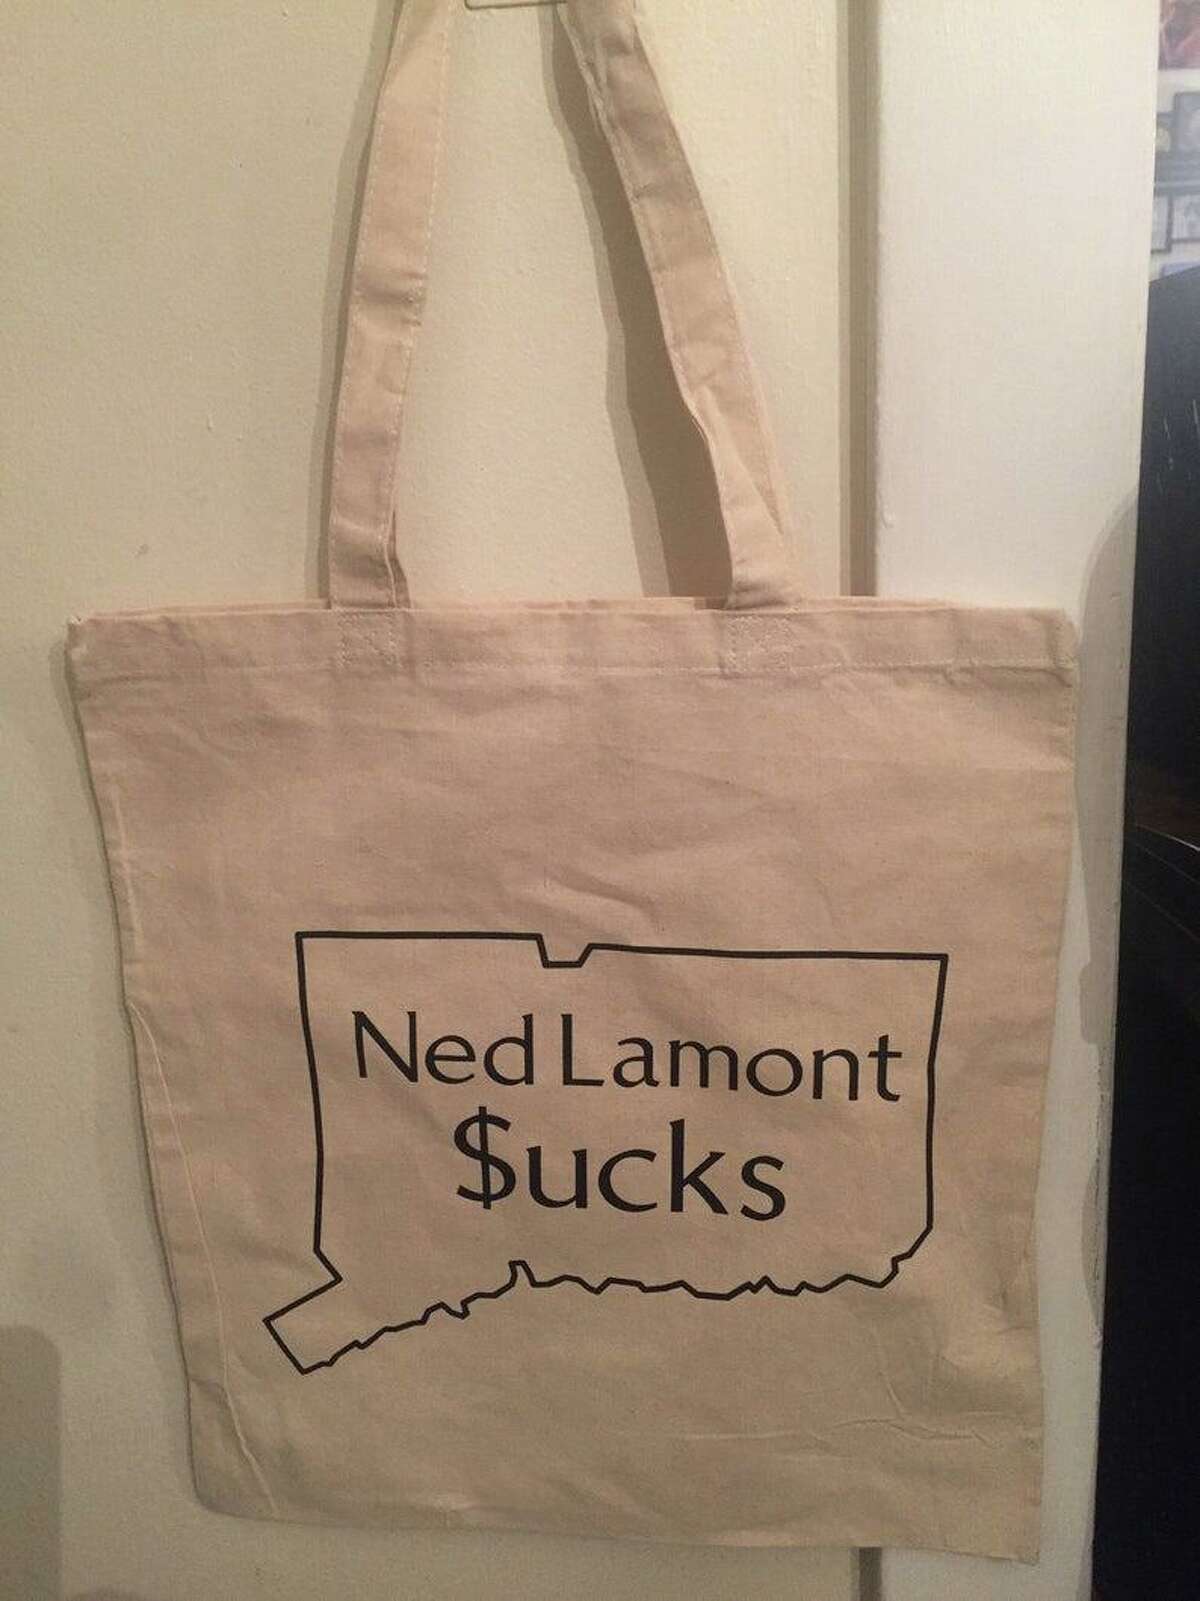 Taylor Viele, of Wallingford, is making and selling reusable shopping bags that proclaim "Ned Lamont $ucks."